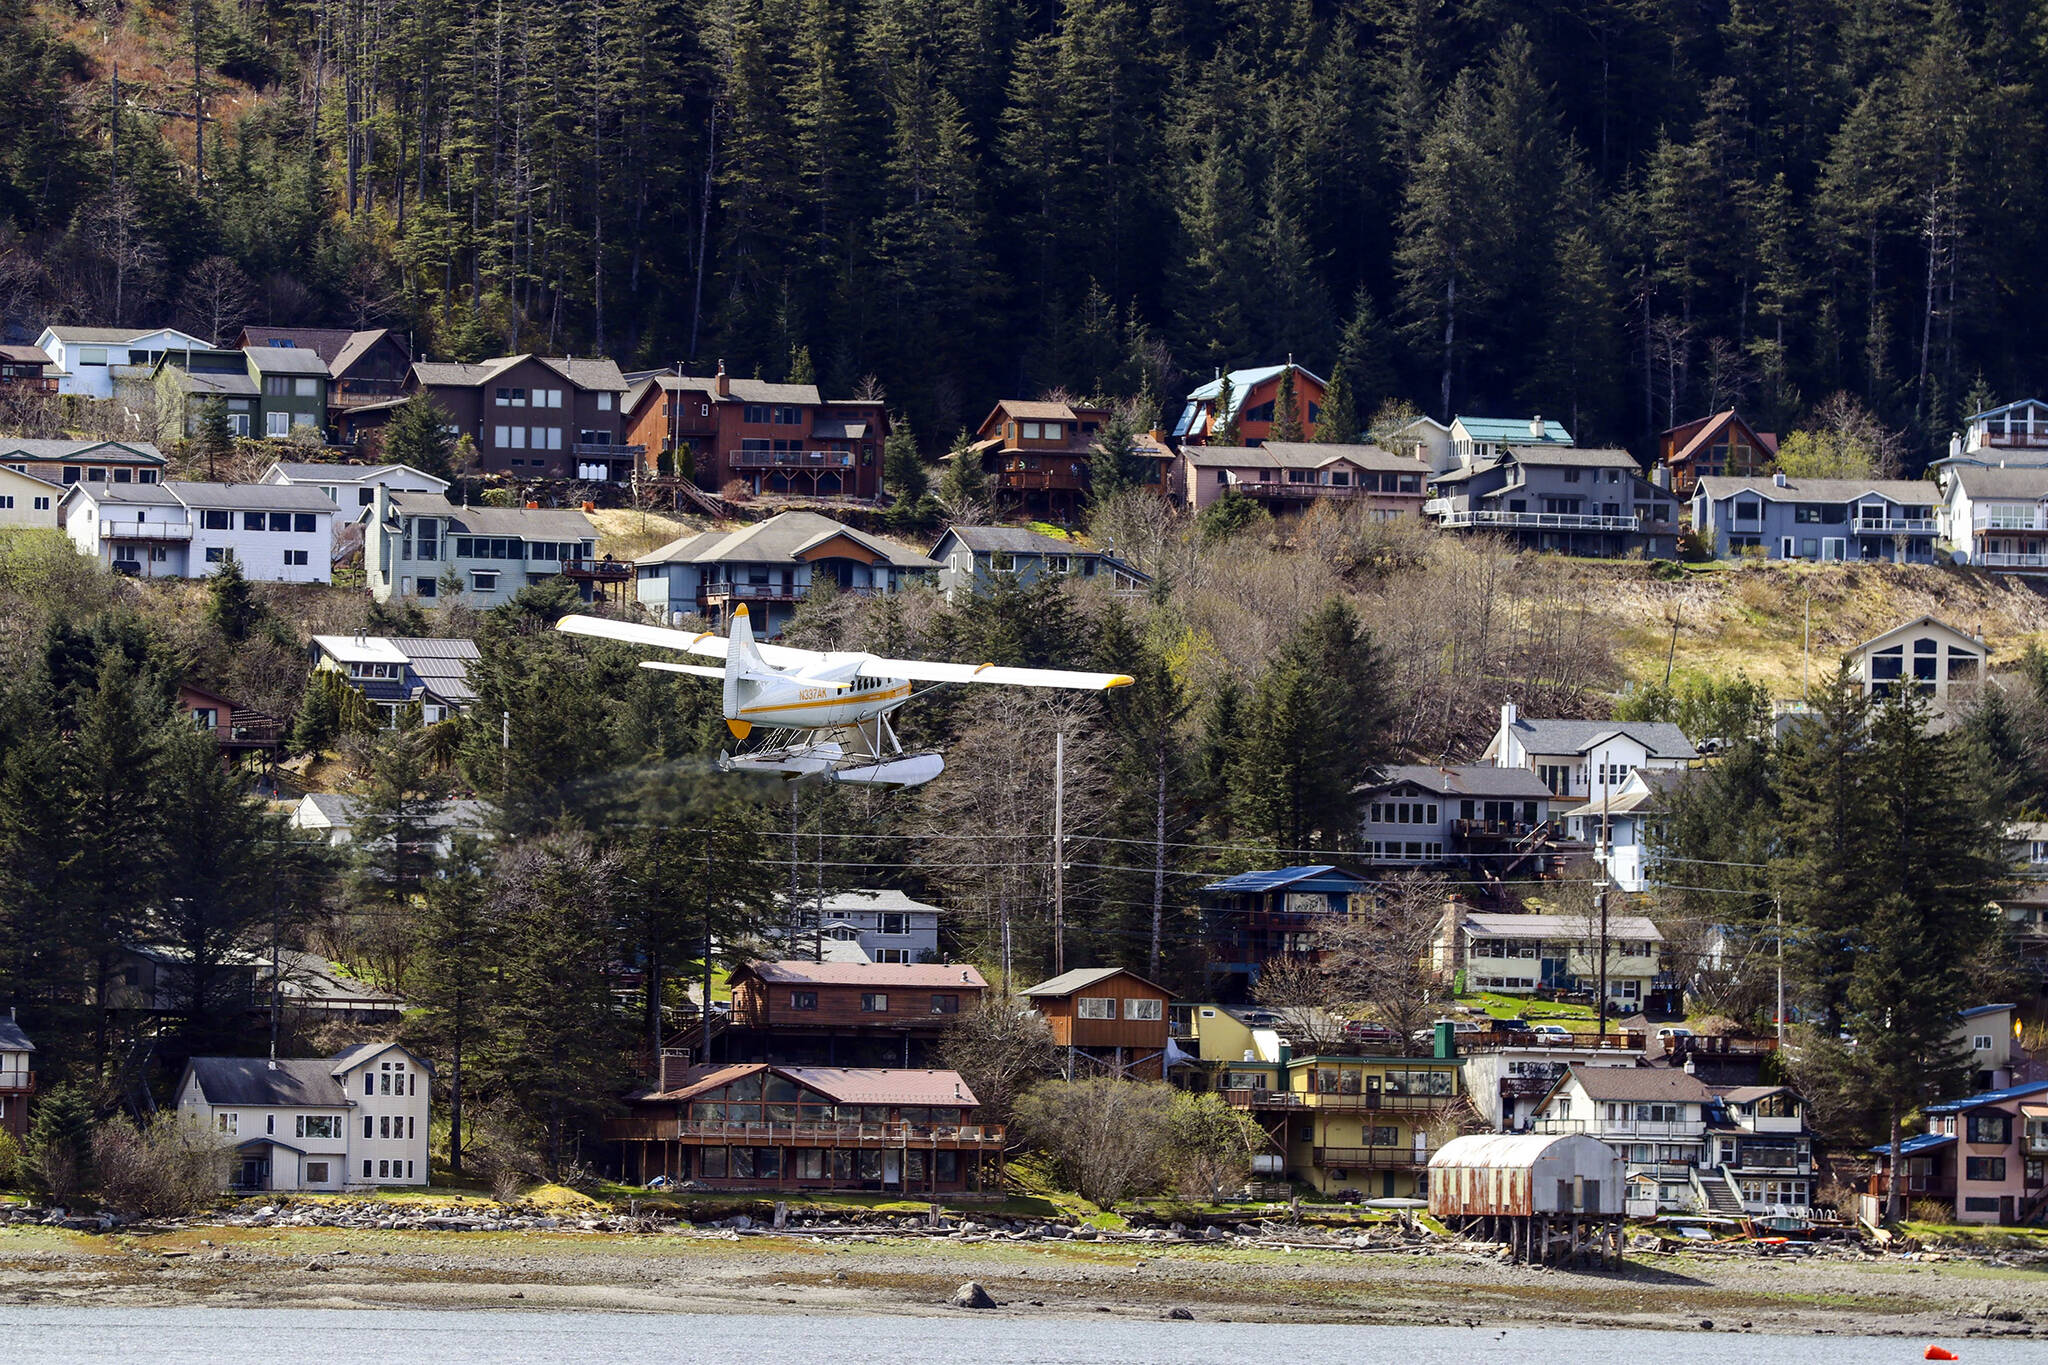 A plane flies in front of a downtown Juneau neighborhood in early May. ity and Borough of Juneau Community Development Department recently hosted a Zoom meeting focused on the city’s second round of funding from the Juneau Affordable Housing Fund, which is currently open for applications. (Michael S. Lockett / Juneau Empire File)